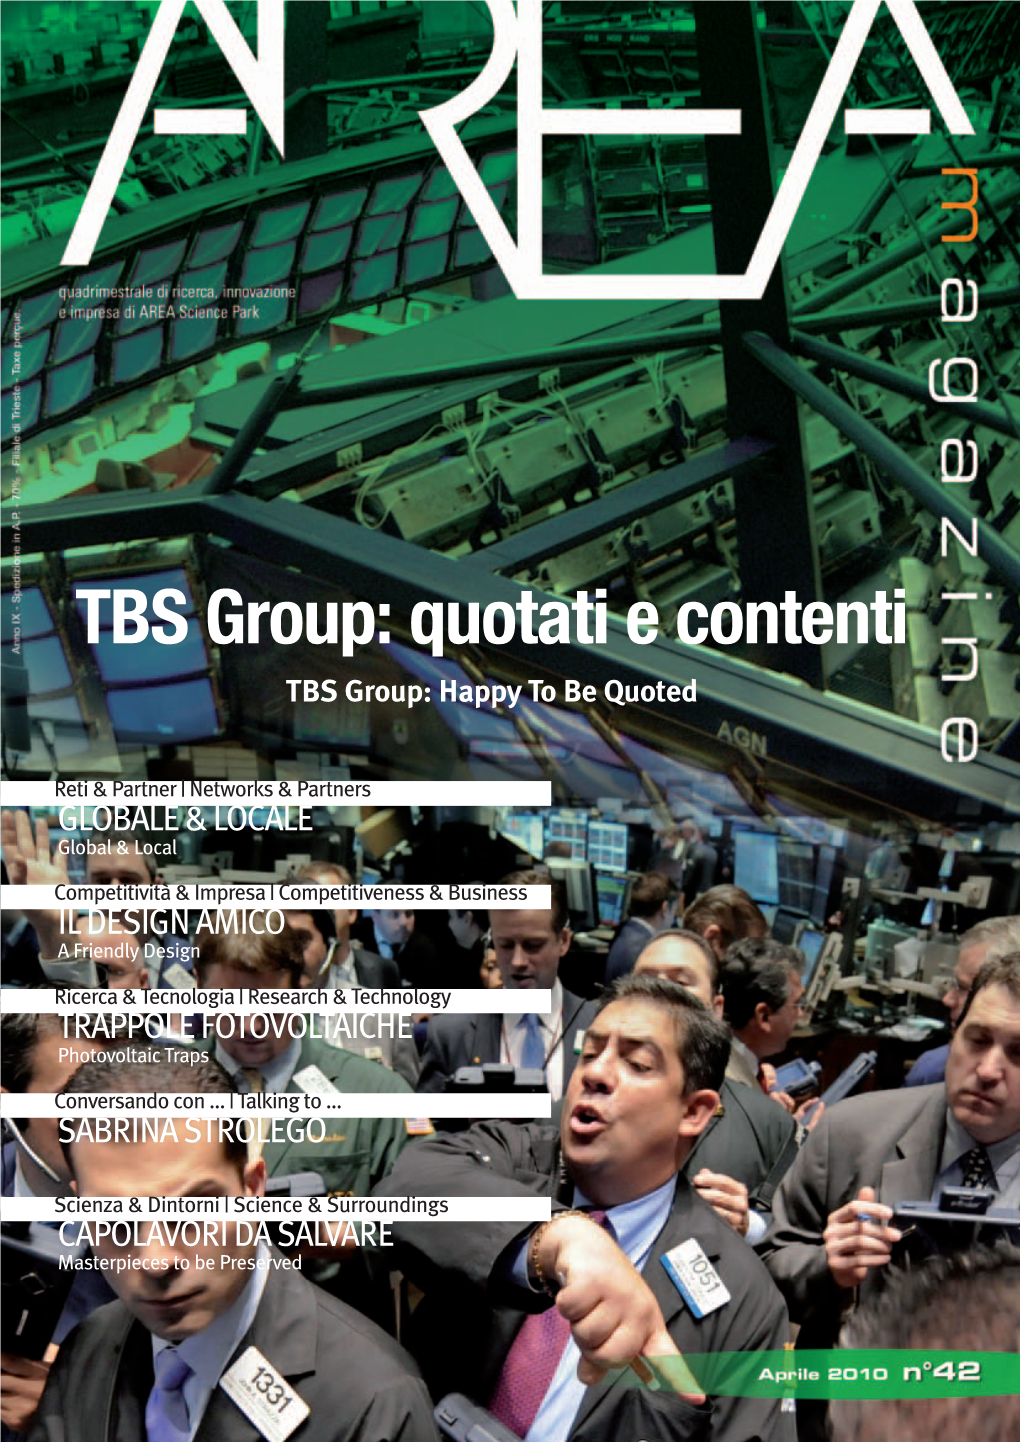 TBS Group: Quotati E Contenti TBS Group: Happy to Be Quoted